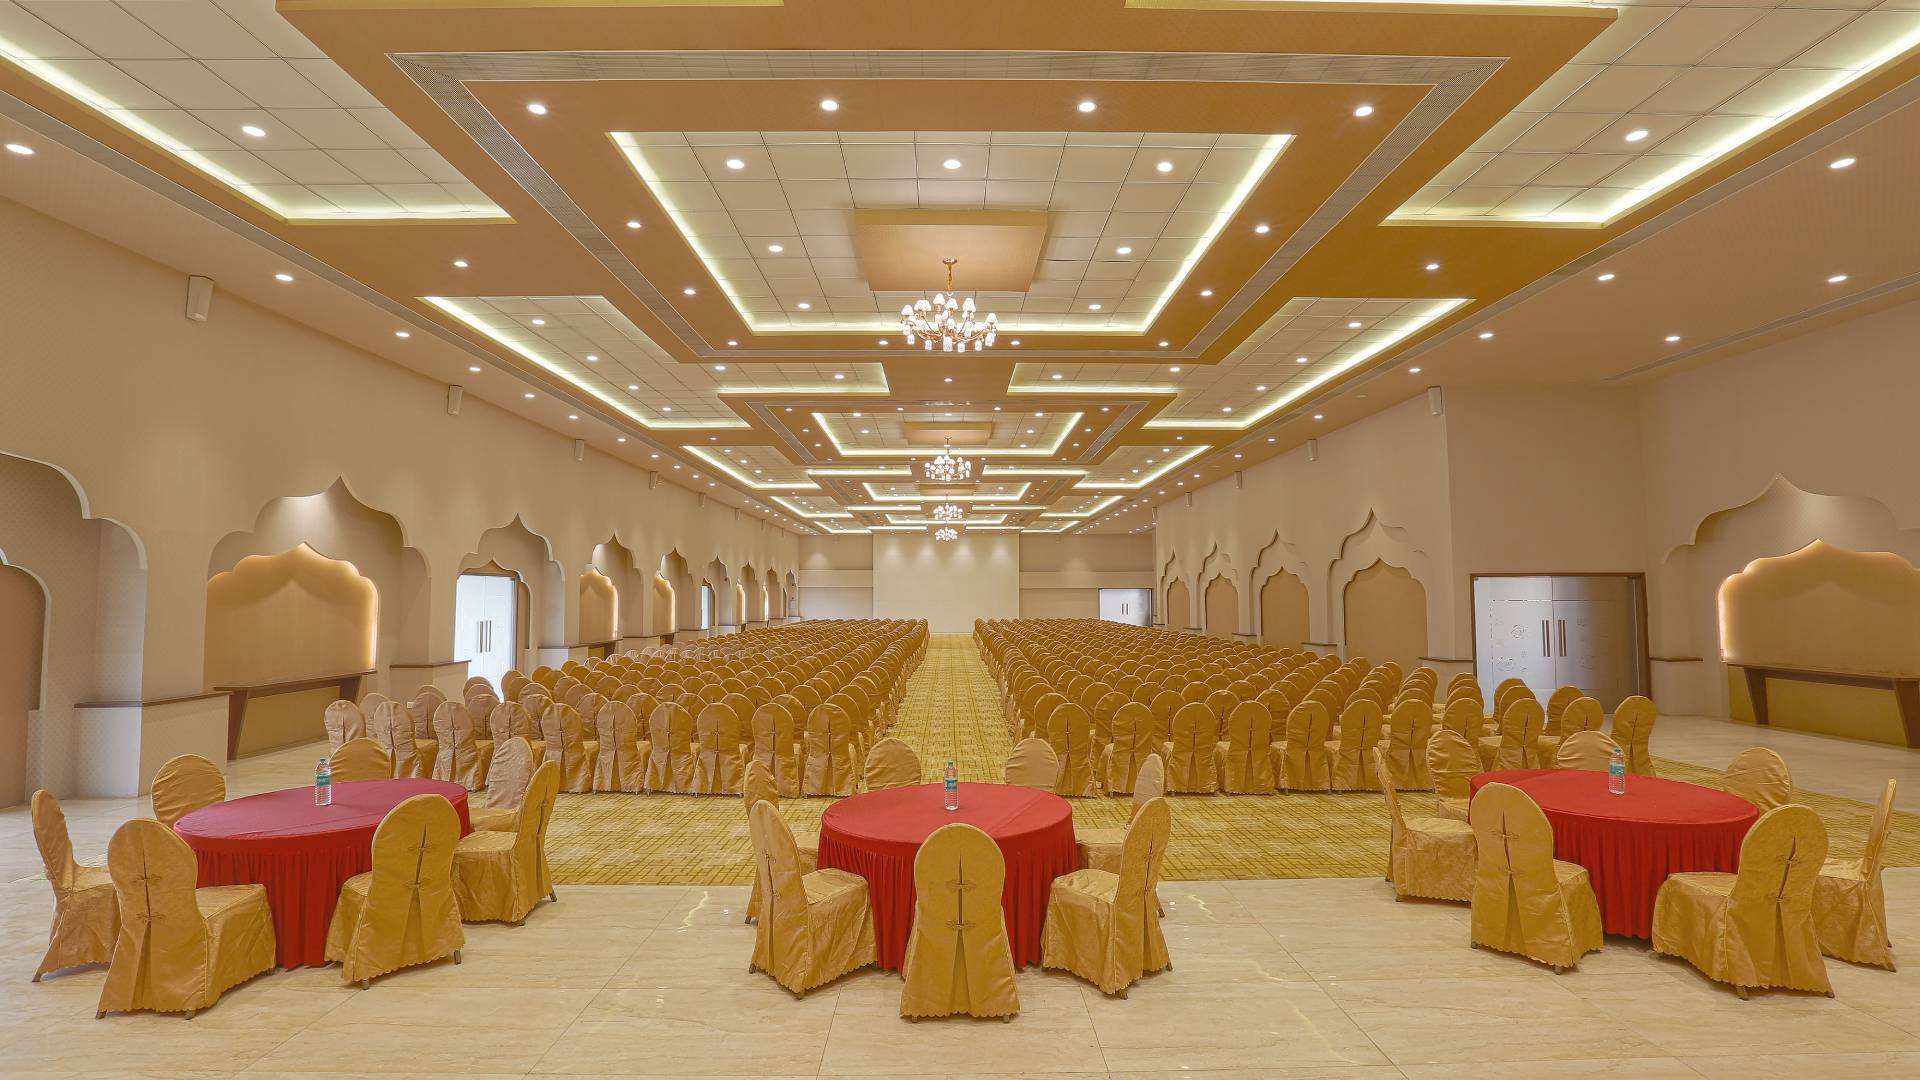 The Kohinoor - Ac Banquet Hall at Sunny's World Pune (5)